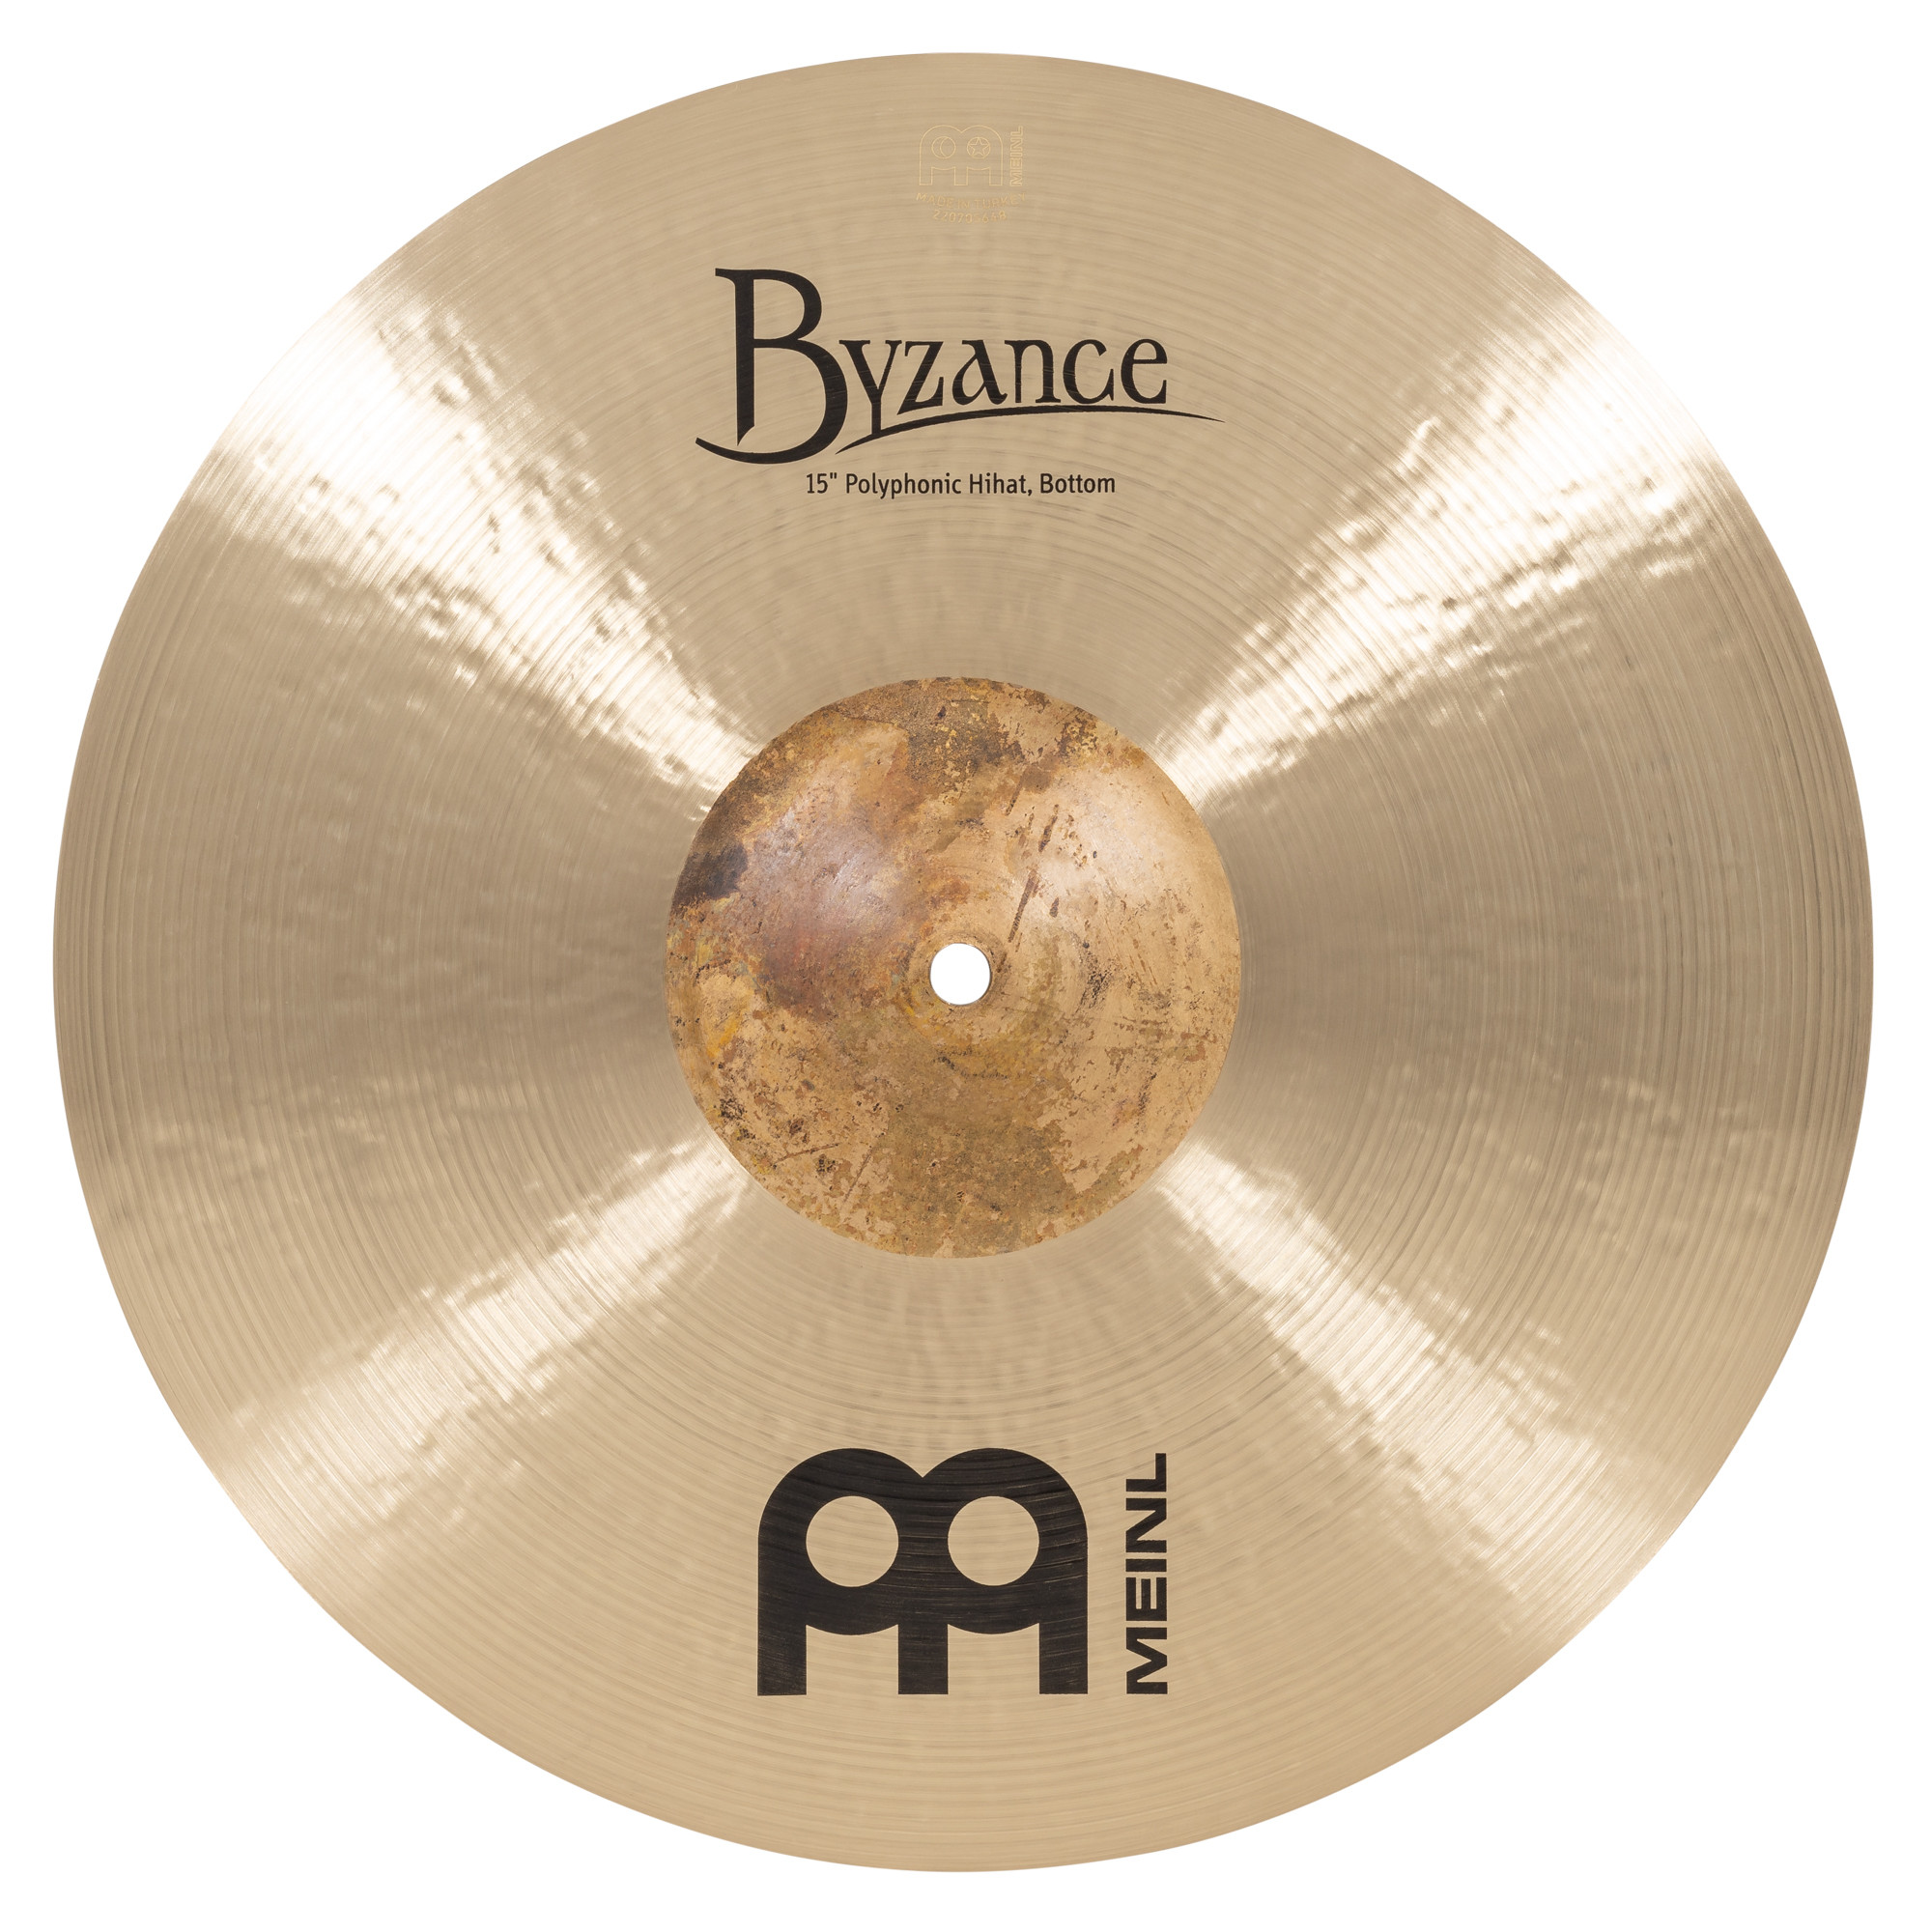 MEINL Cymbals Byzance Traditional Polyphonic HiHat - 15